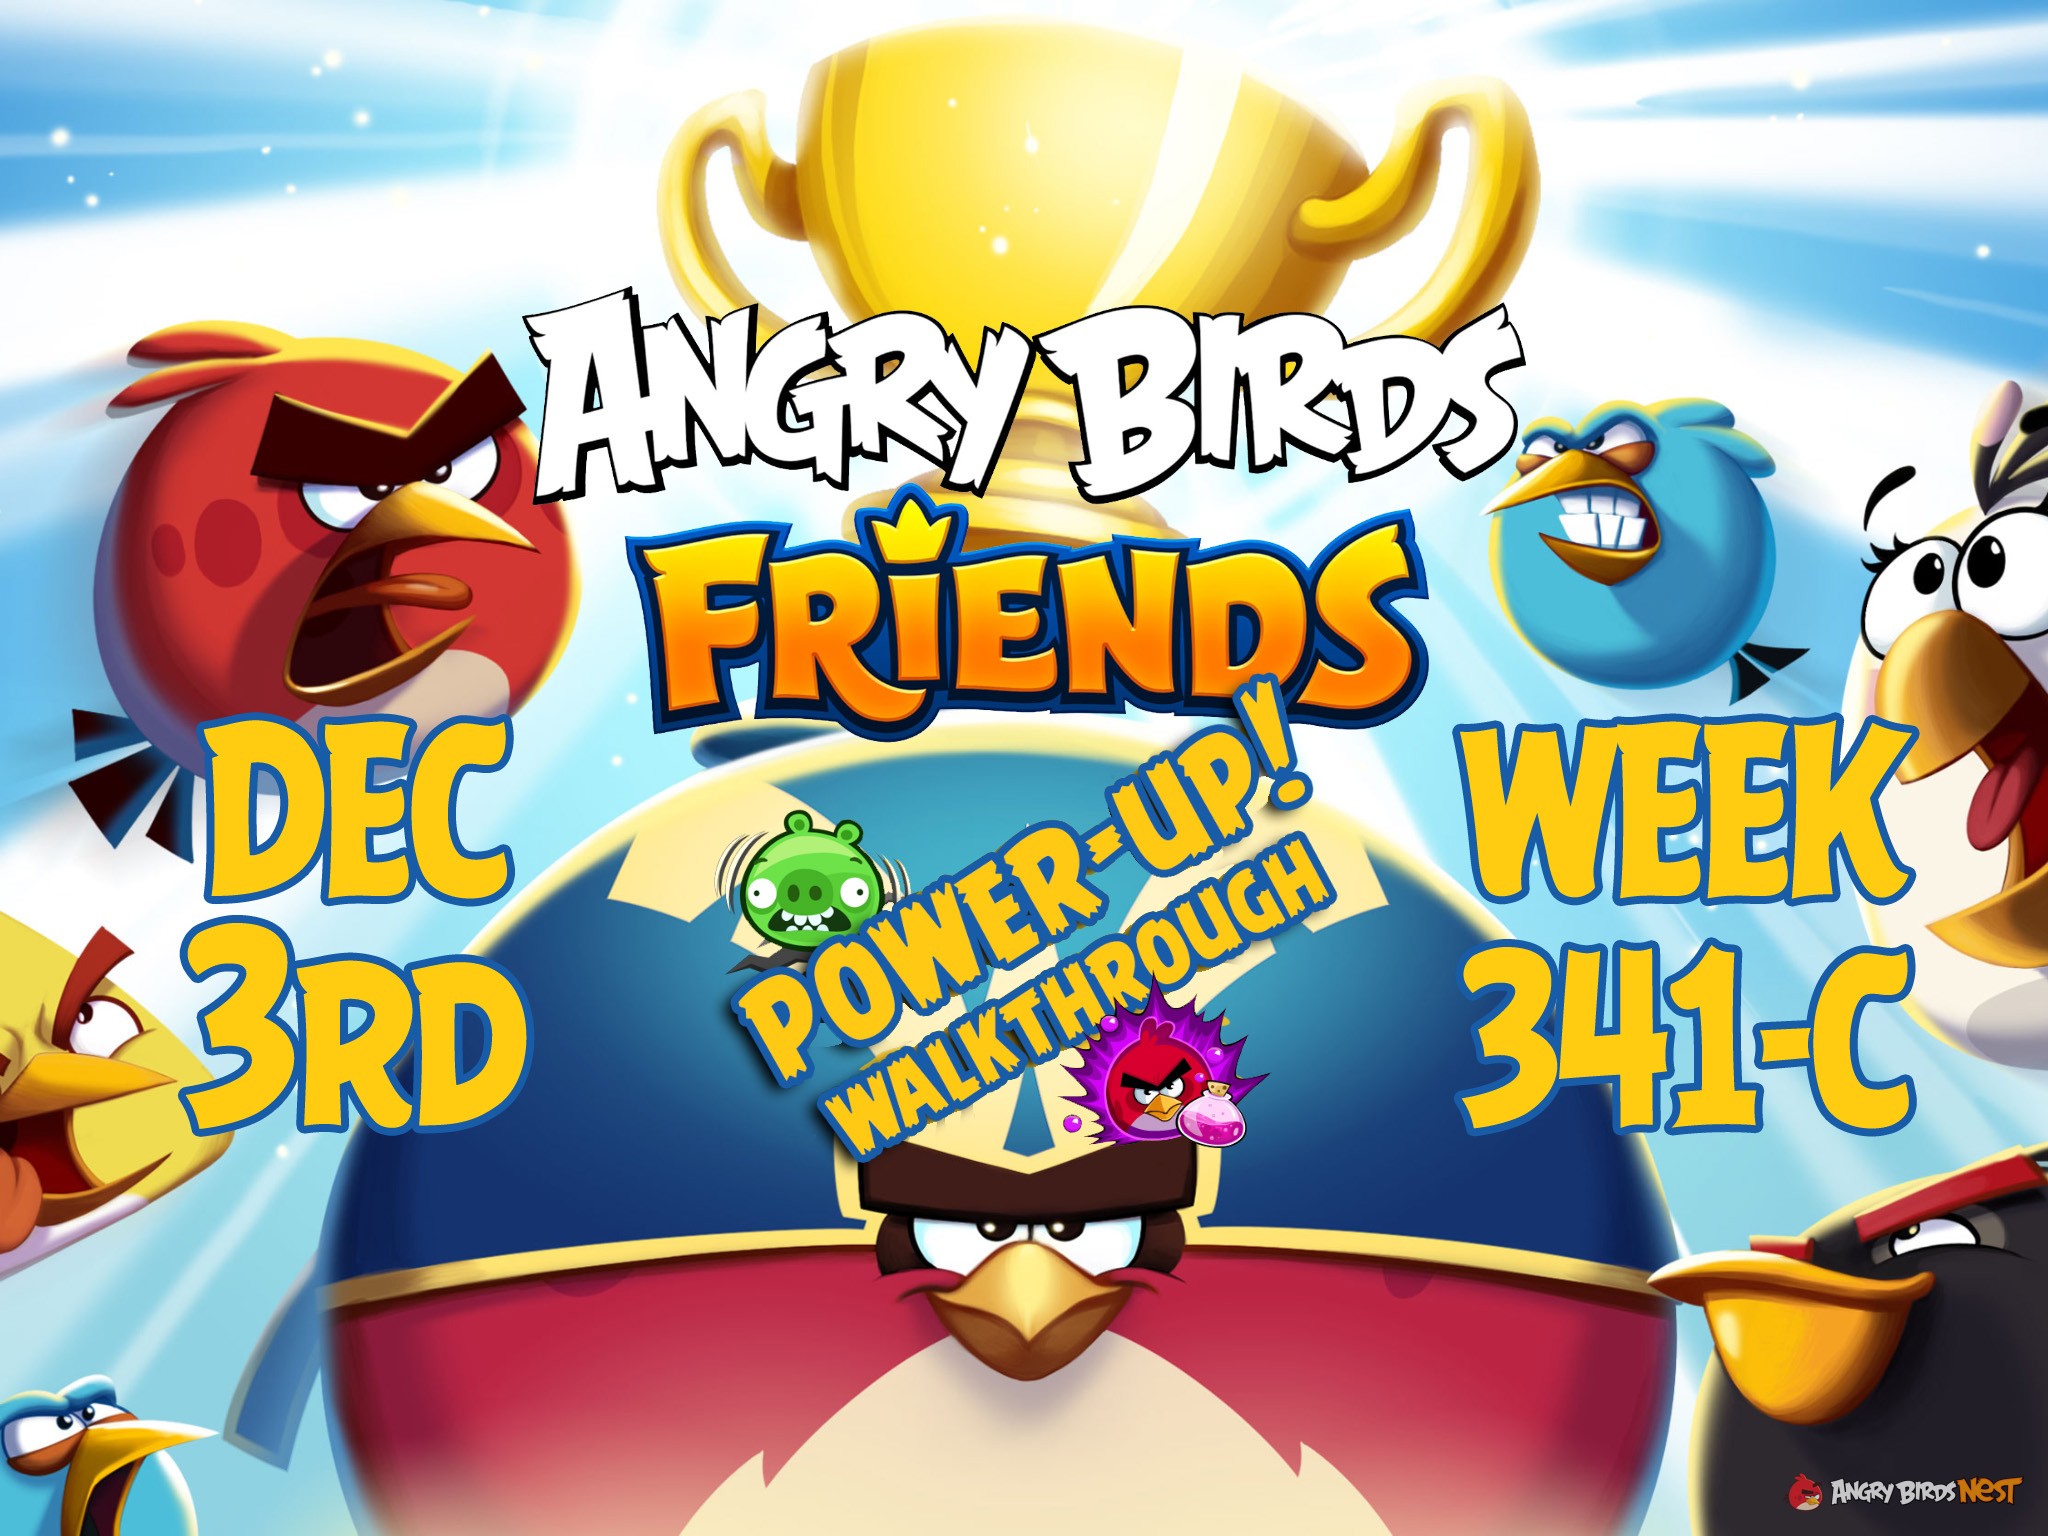 Angry-Birds-Friends-Tournament-Week-341-C-Feature-Image-PU